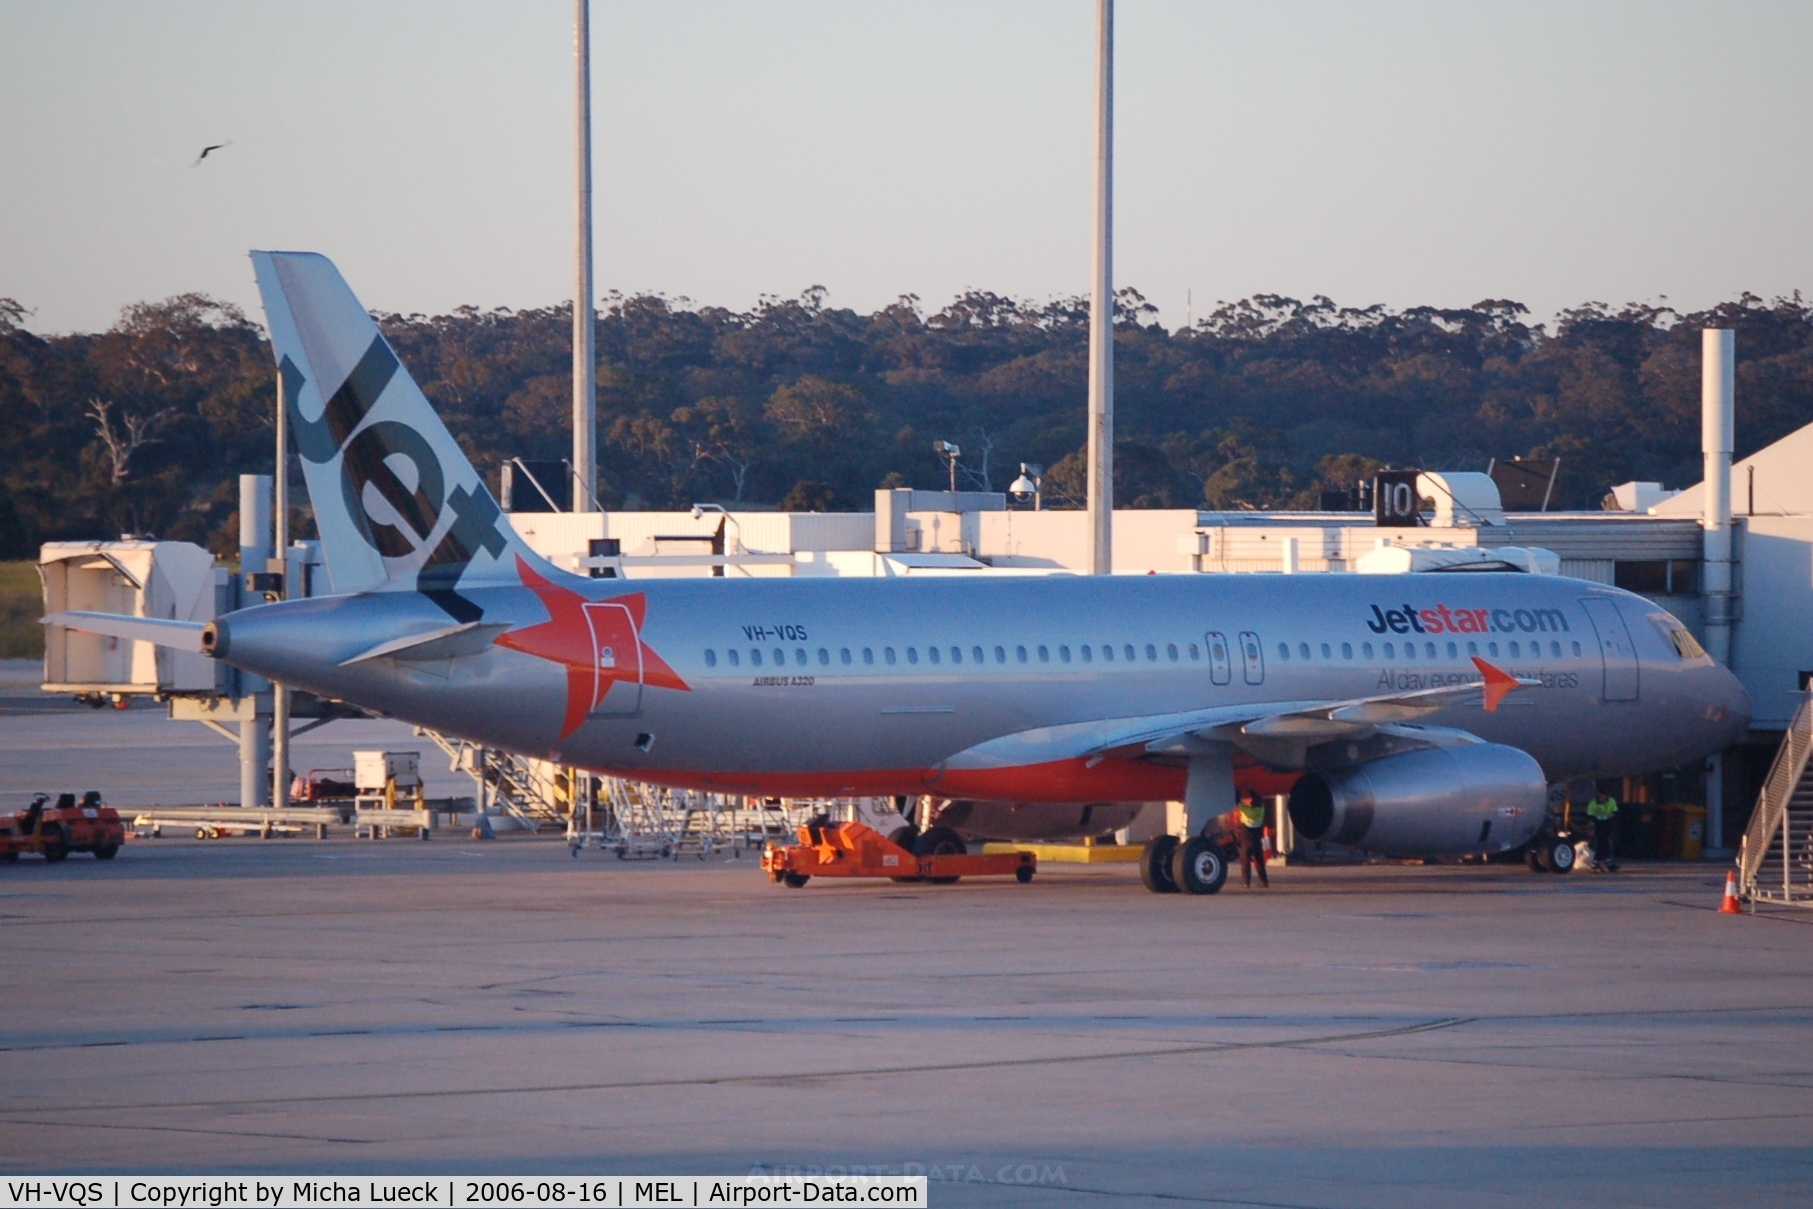 VH-VQS, 2005 Airbus A320-232 C/N 2515, Getting ready for an evening departure